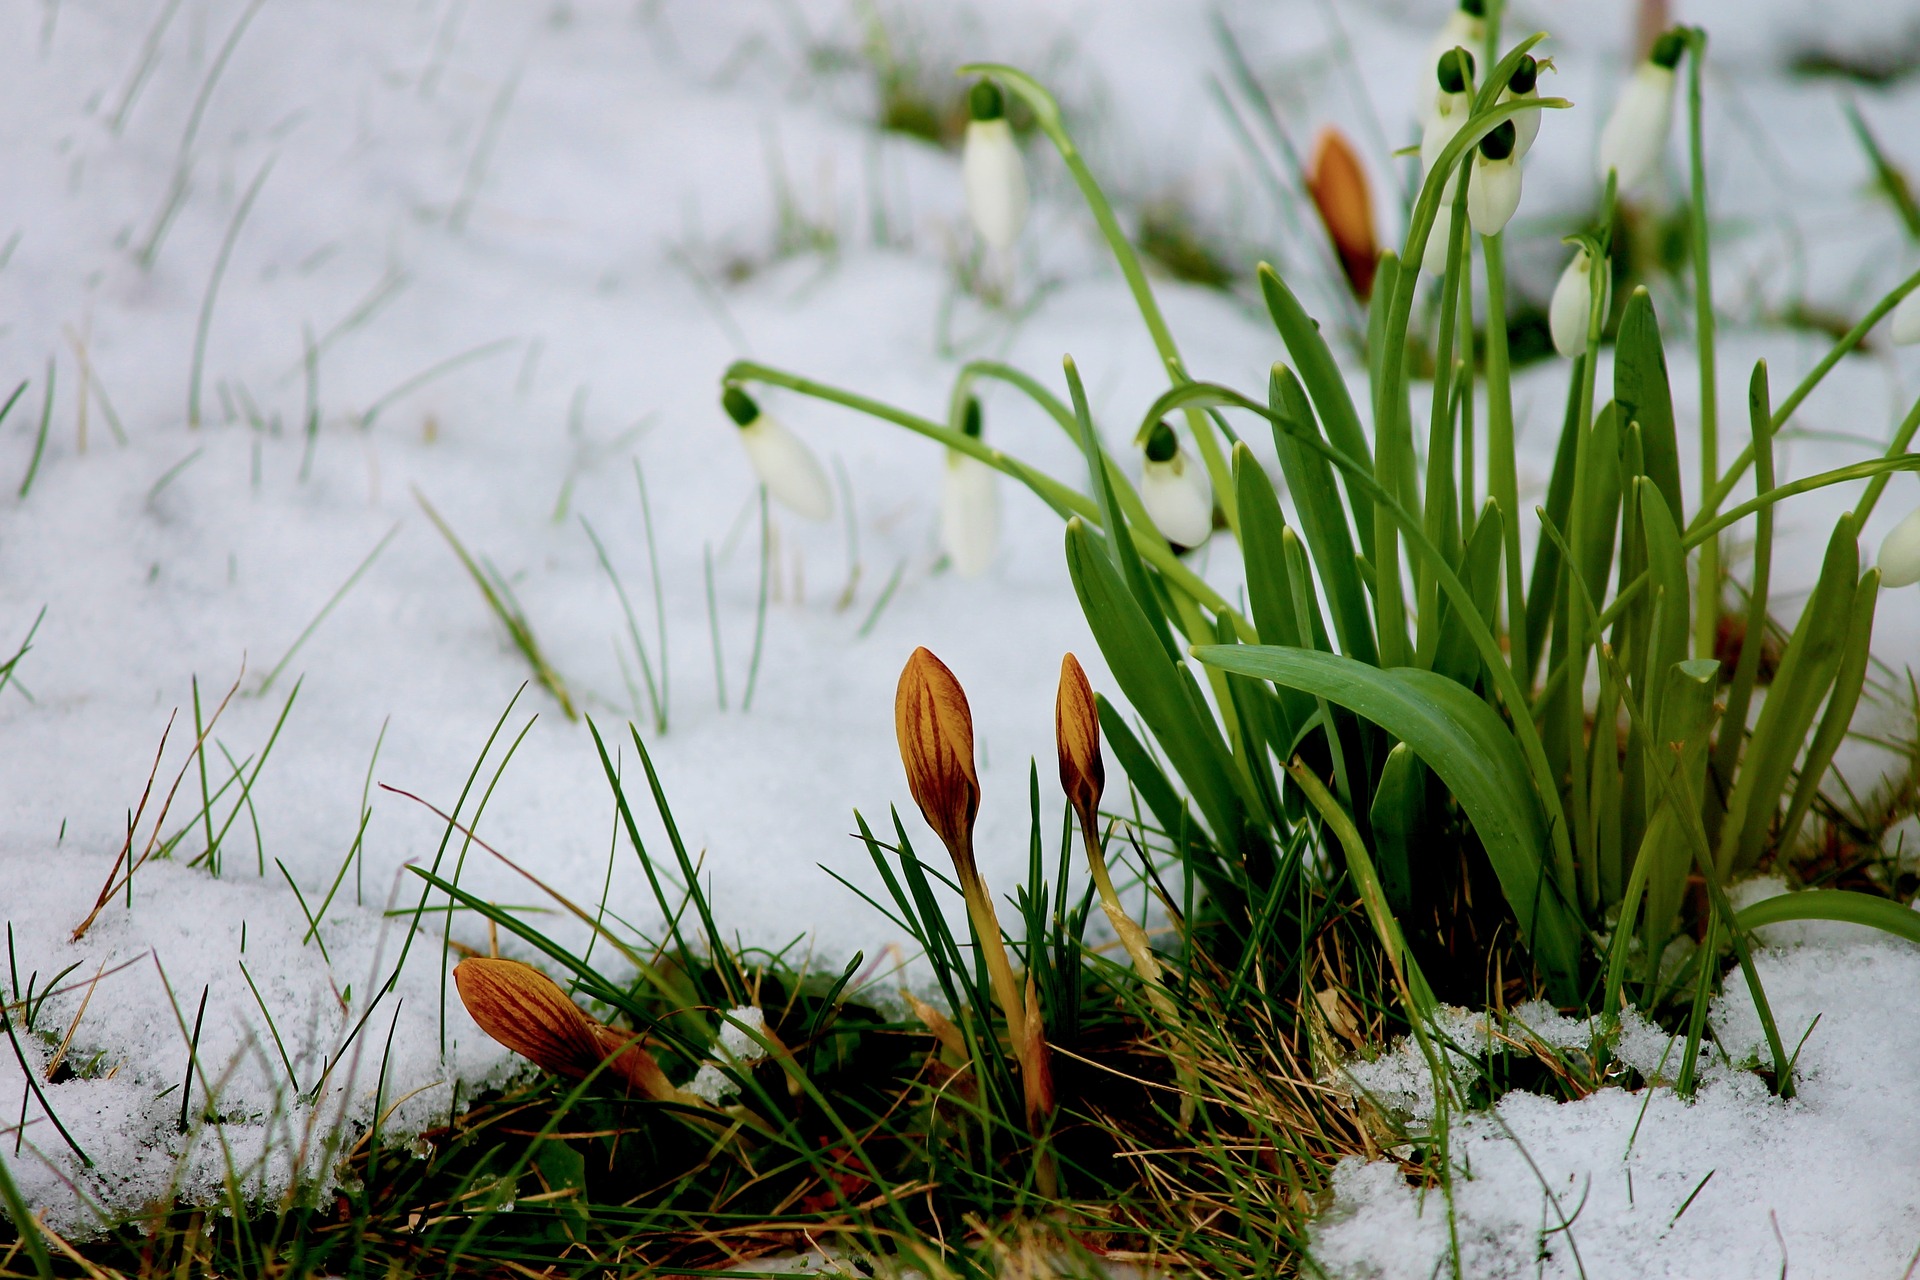 Flowers budding in snow and dirt